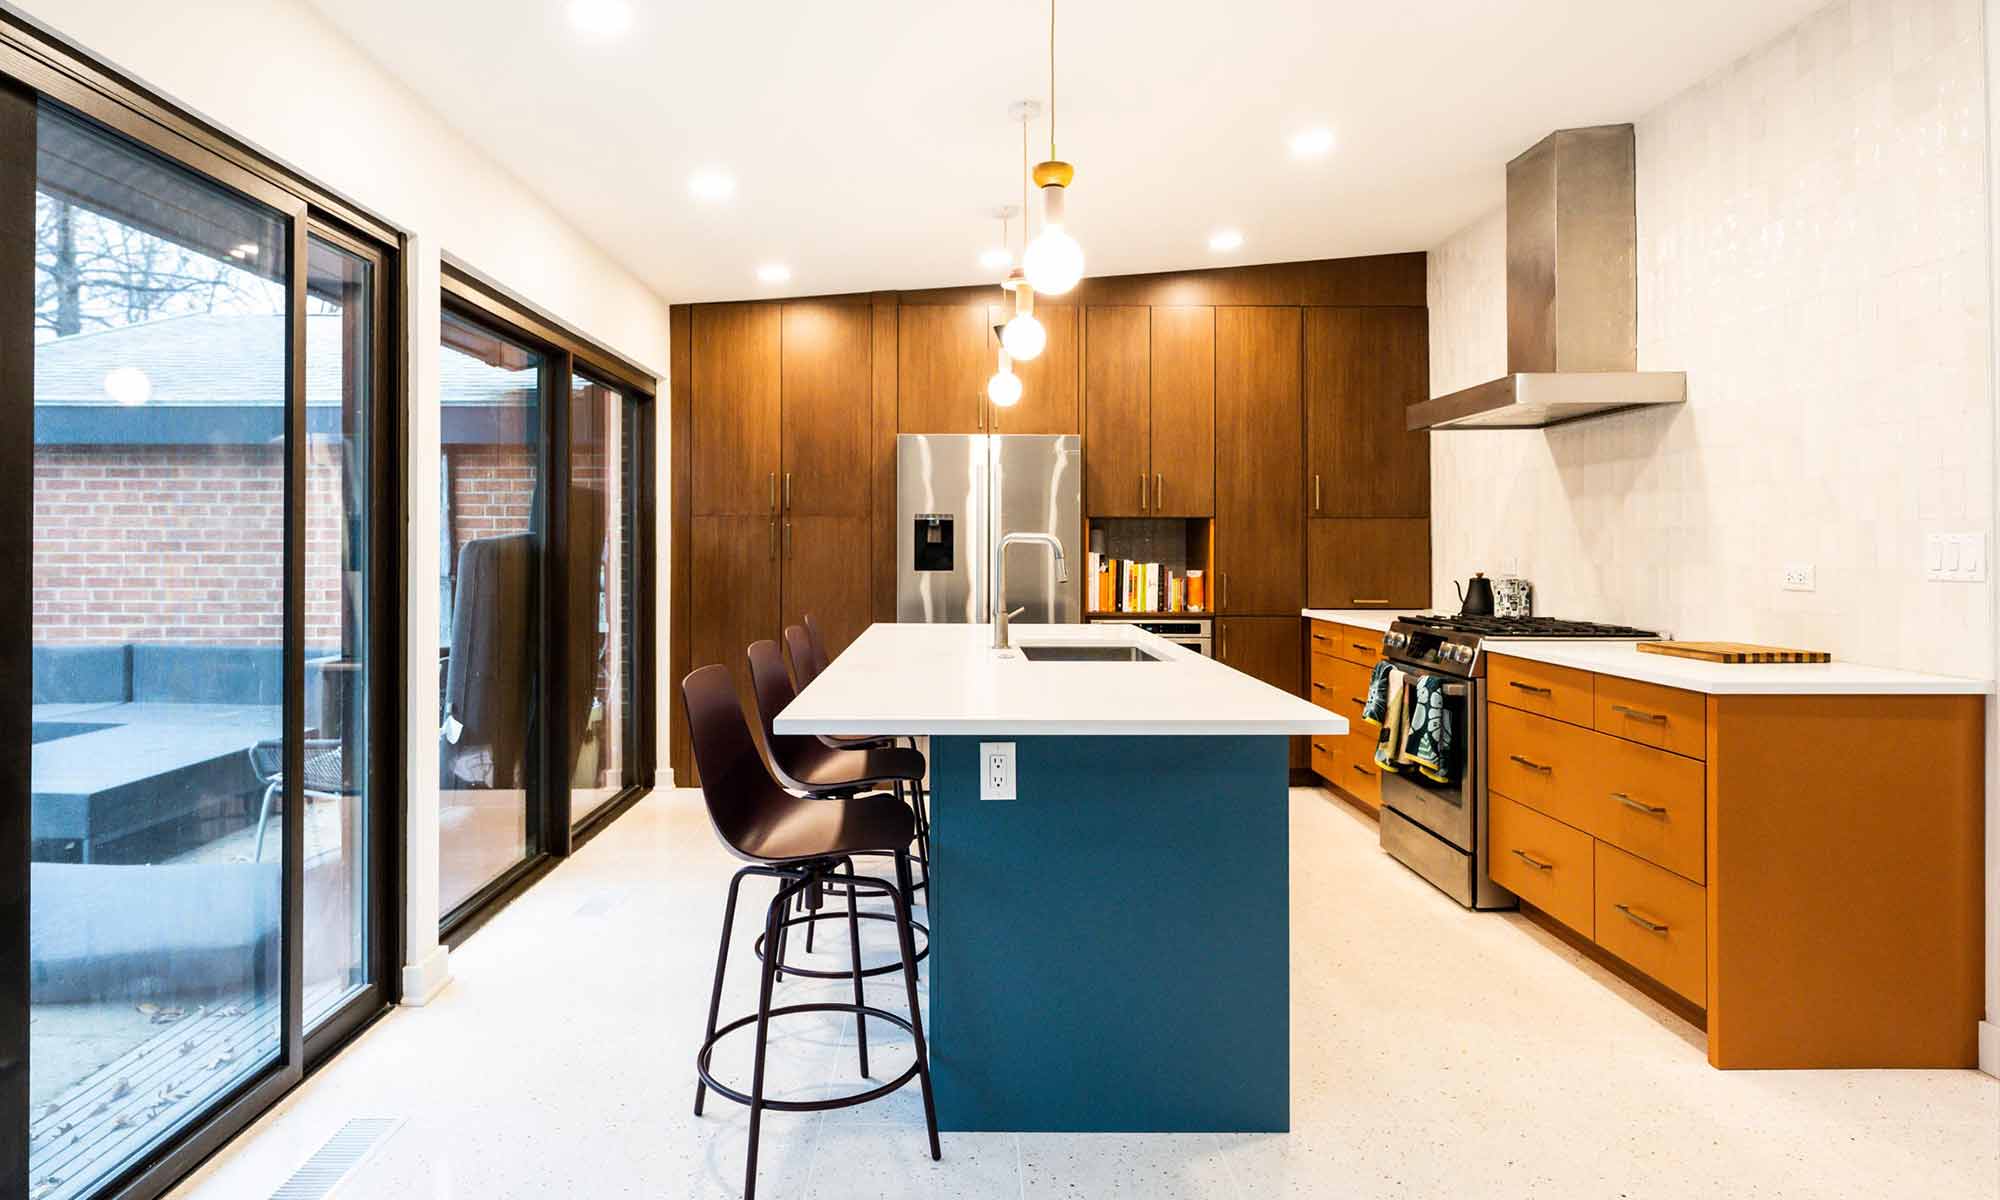 Mid century modern luxury kitchen remodel in Riverside IL by LivCo with blue island orange perimeter cabinets walnut tall cabinets and terrazzo flooring